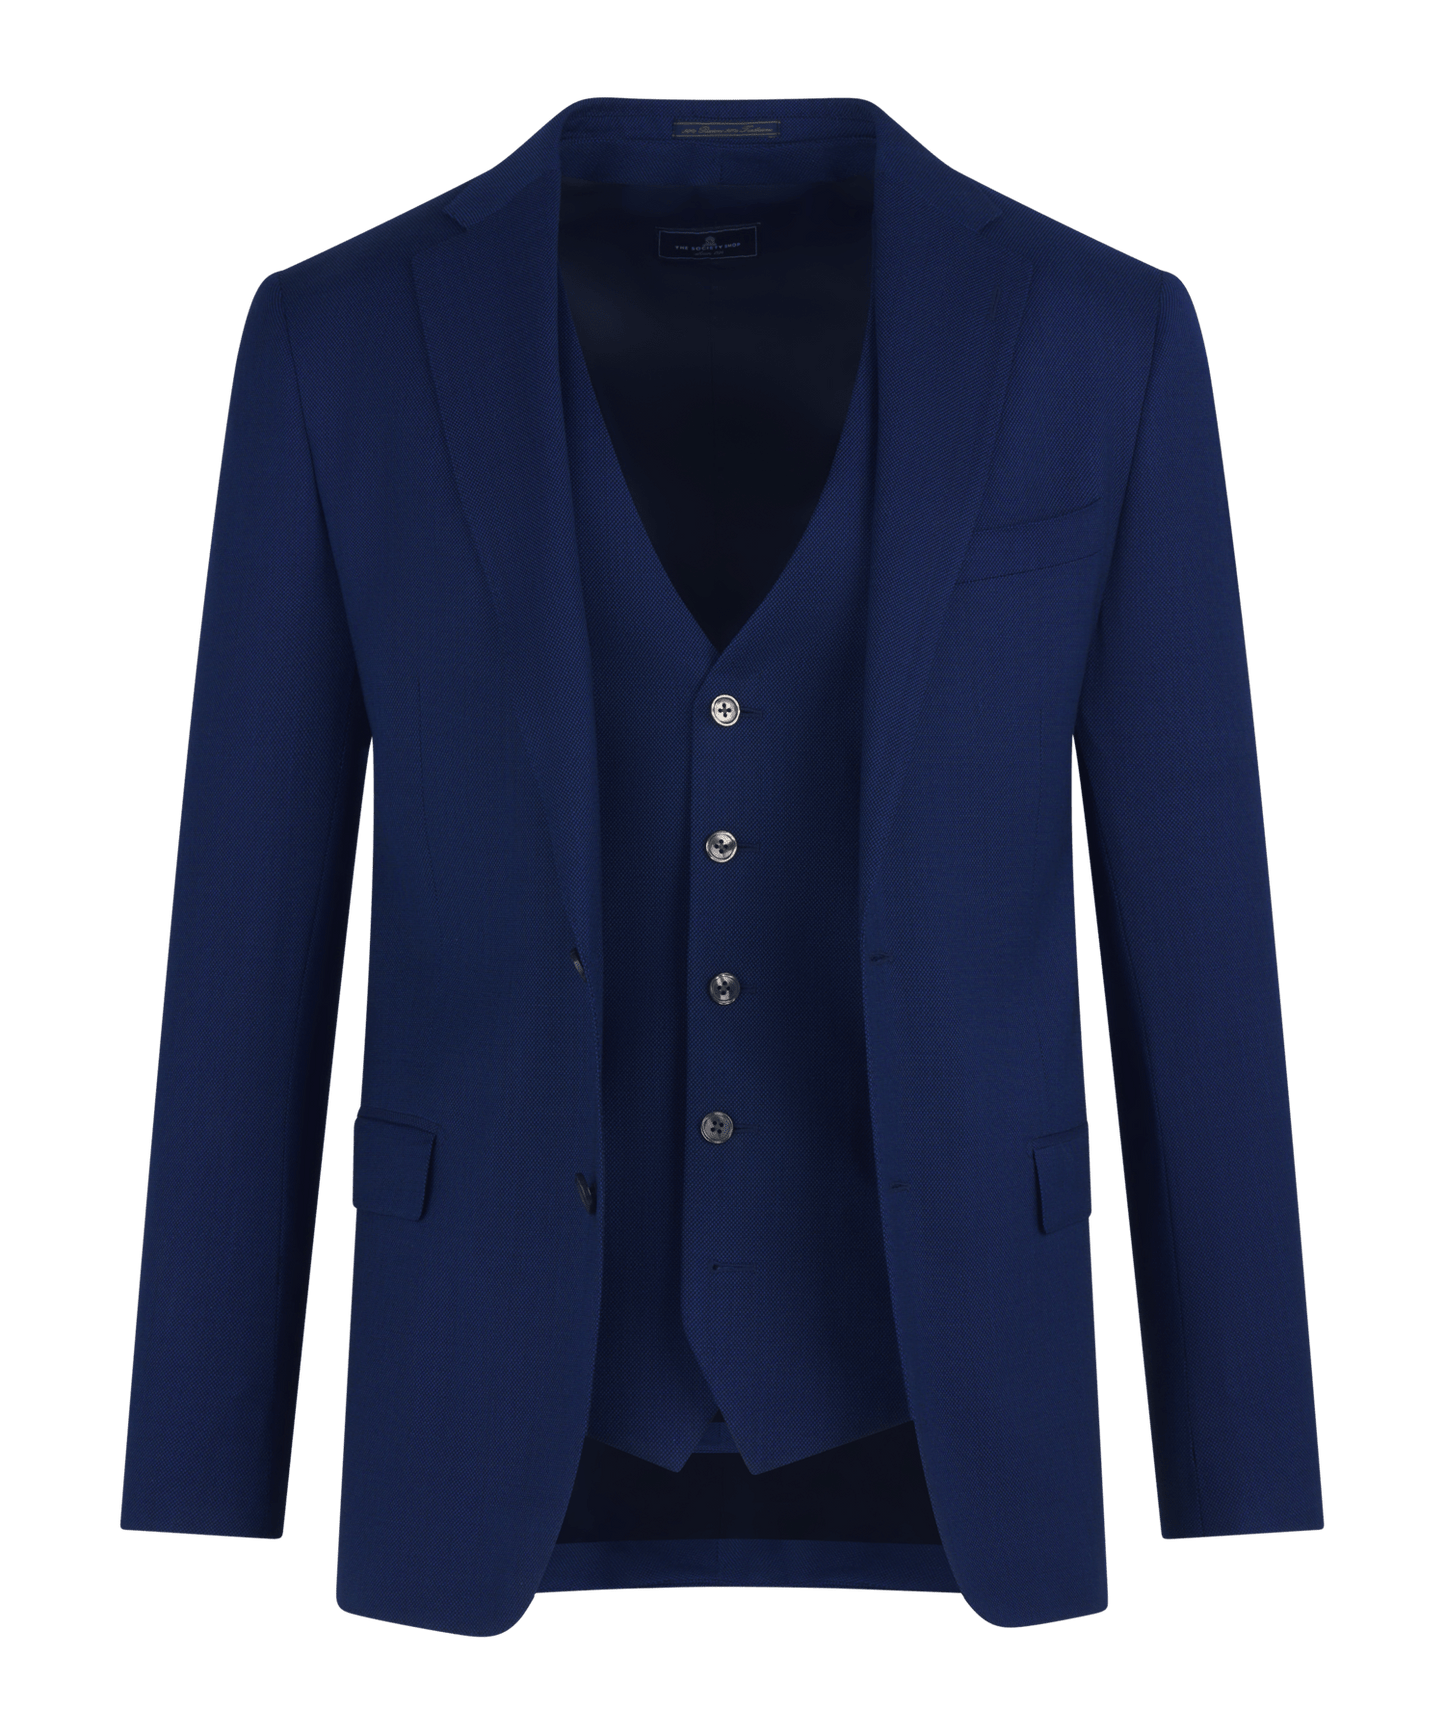 SOCI3TY Driedelig pak donkerblauw 130's wol - The Society Shop